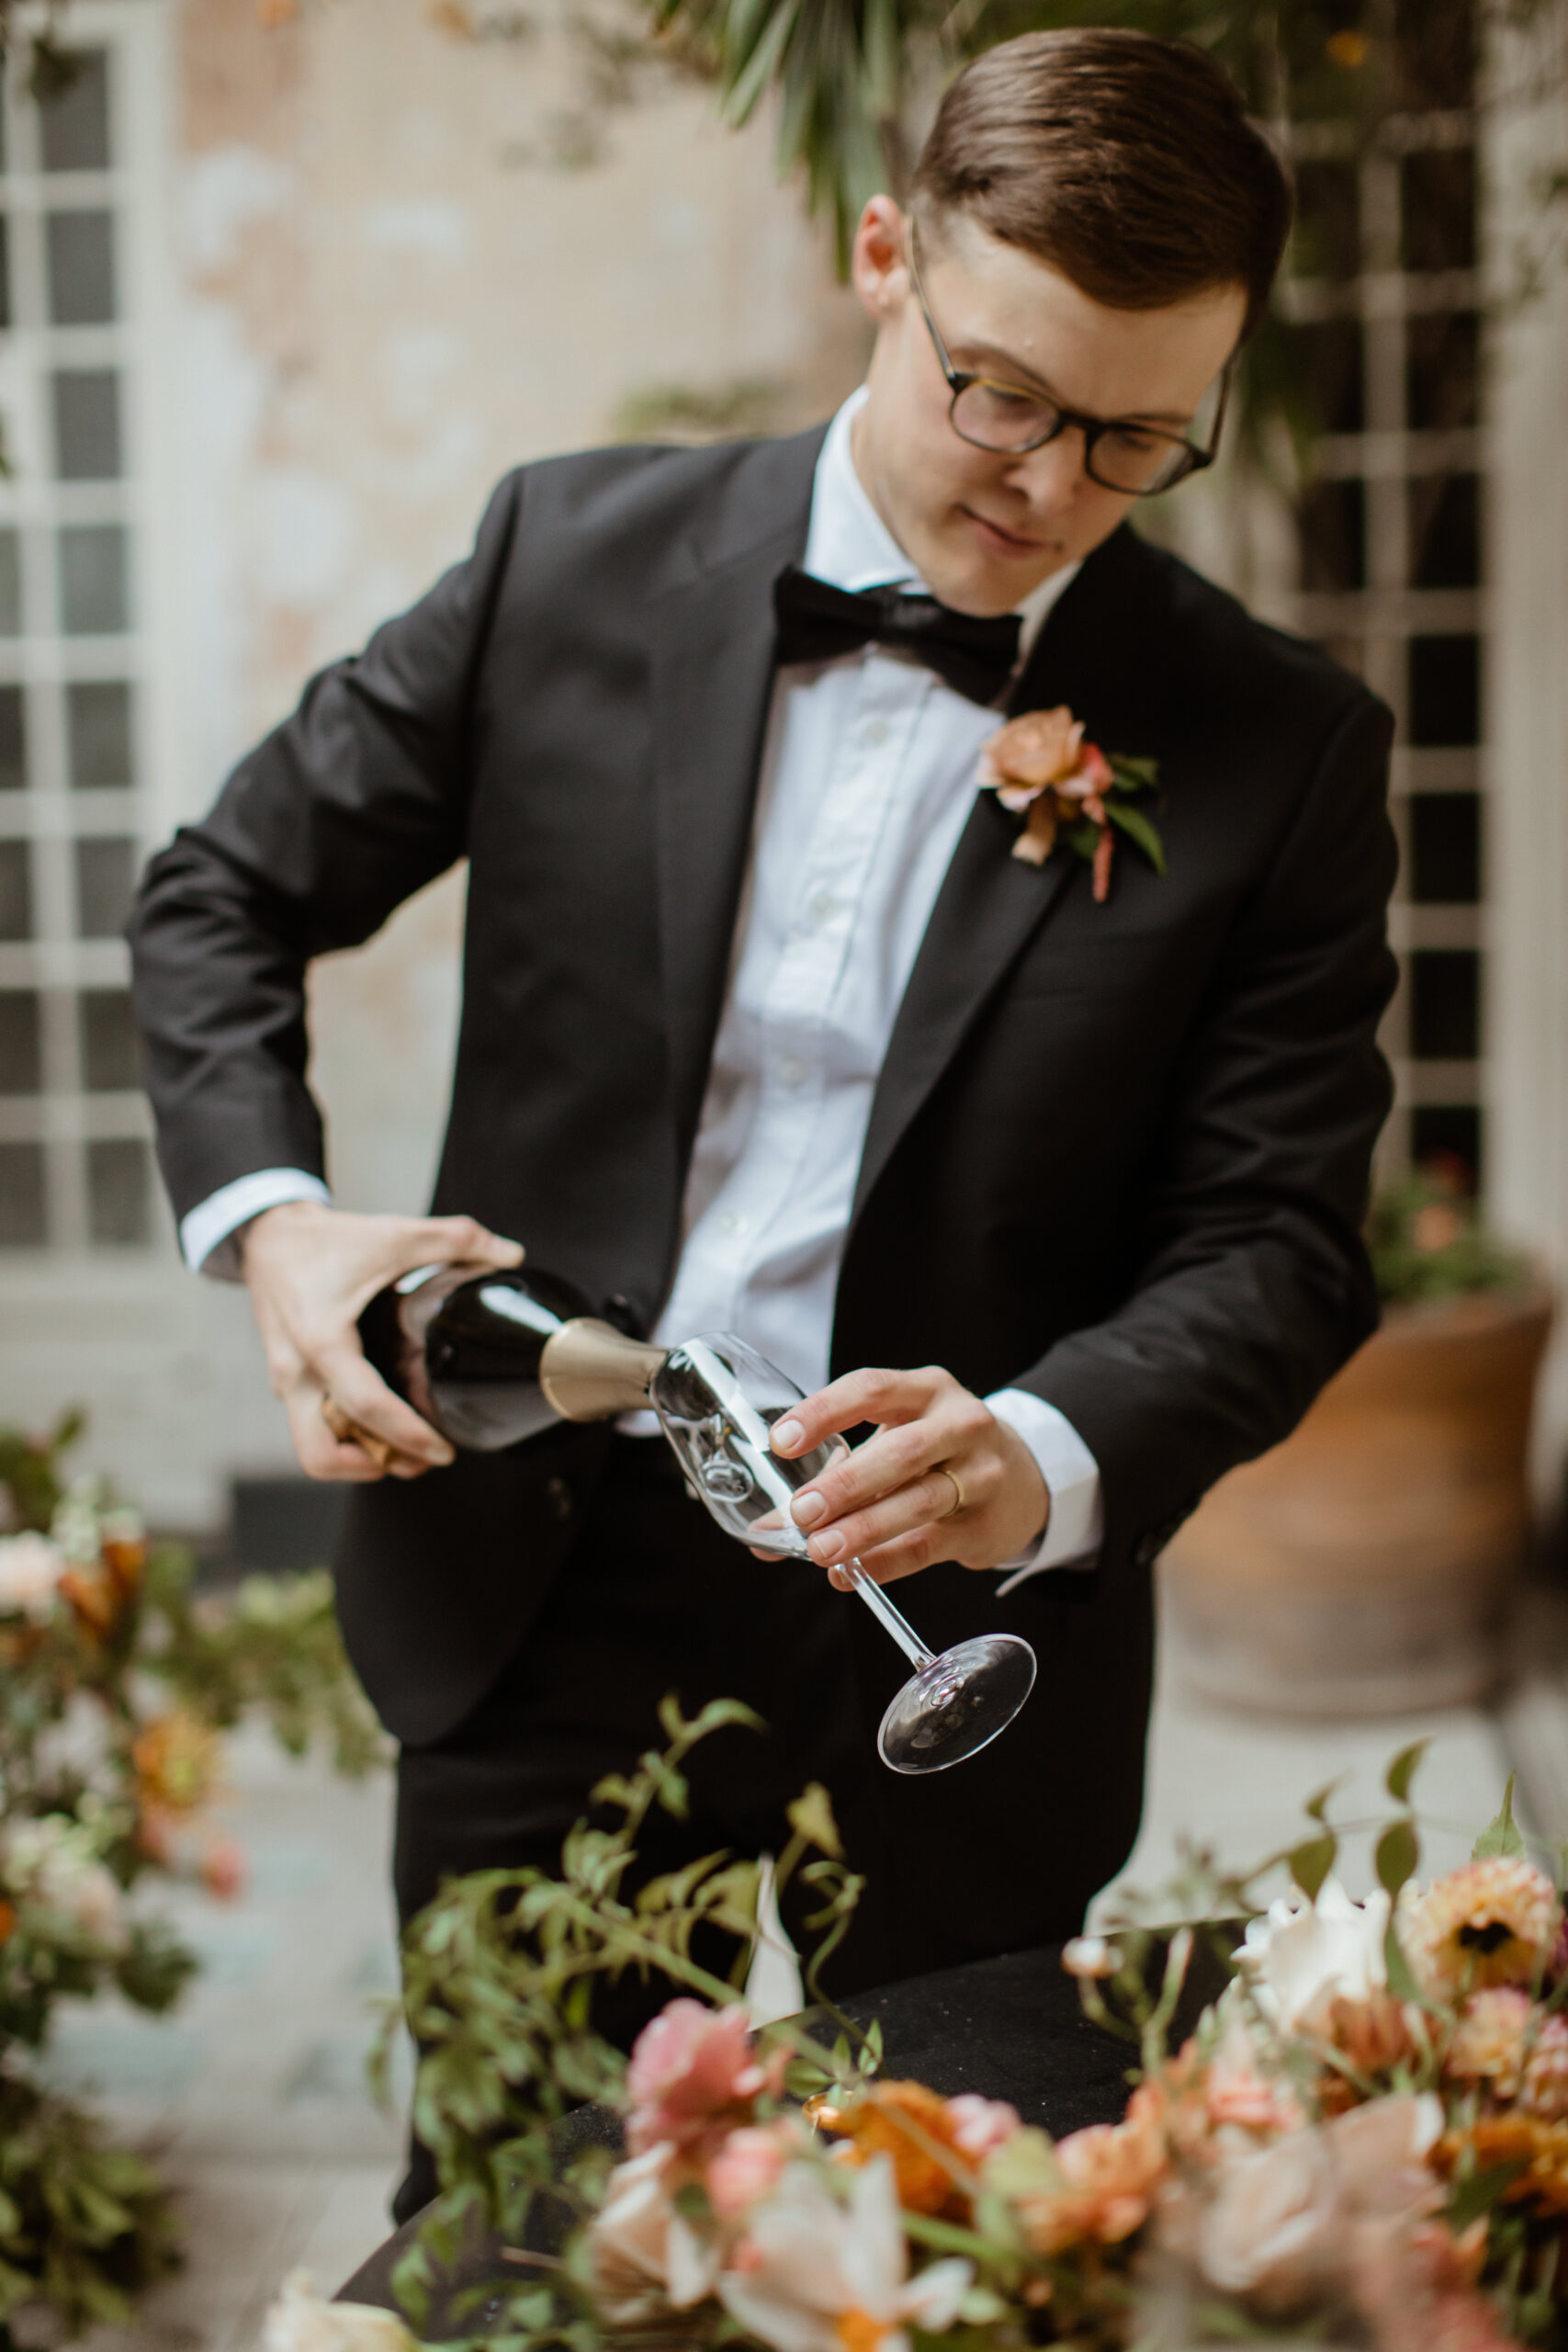 Handsome groom pours his new wife a glass of champagne to celebrate their dreamy elopement